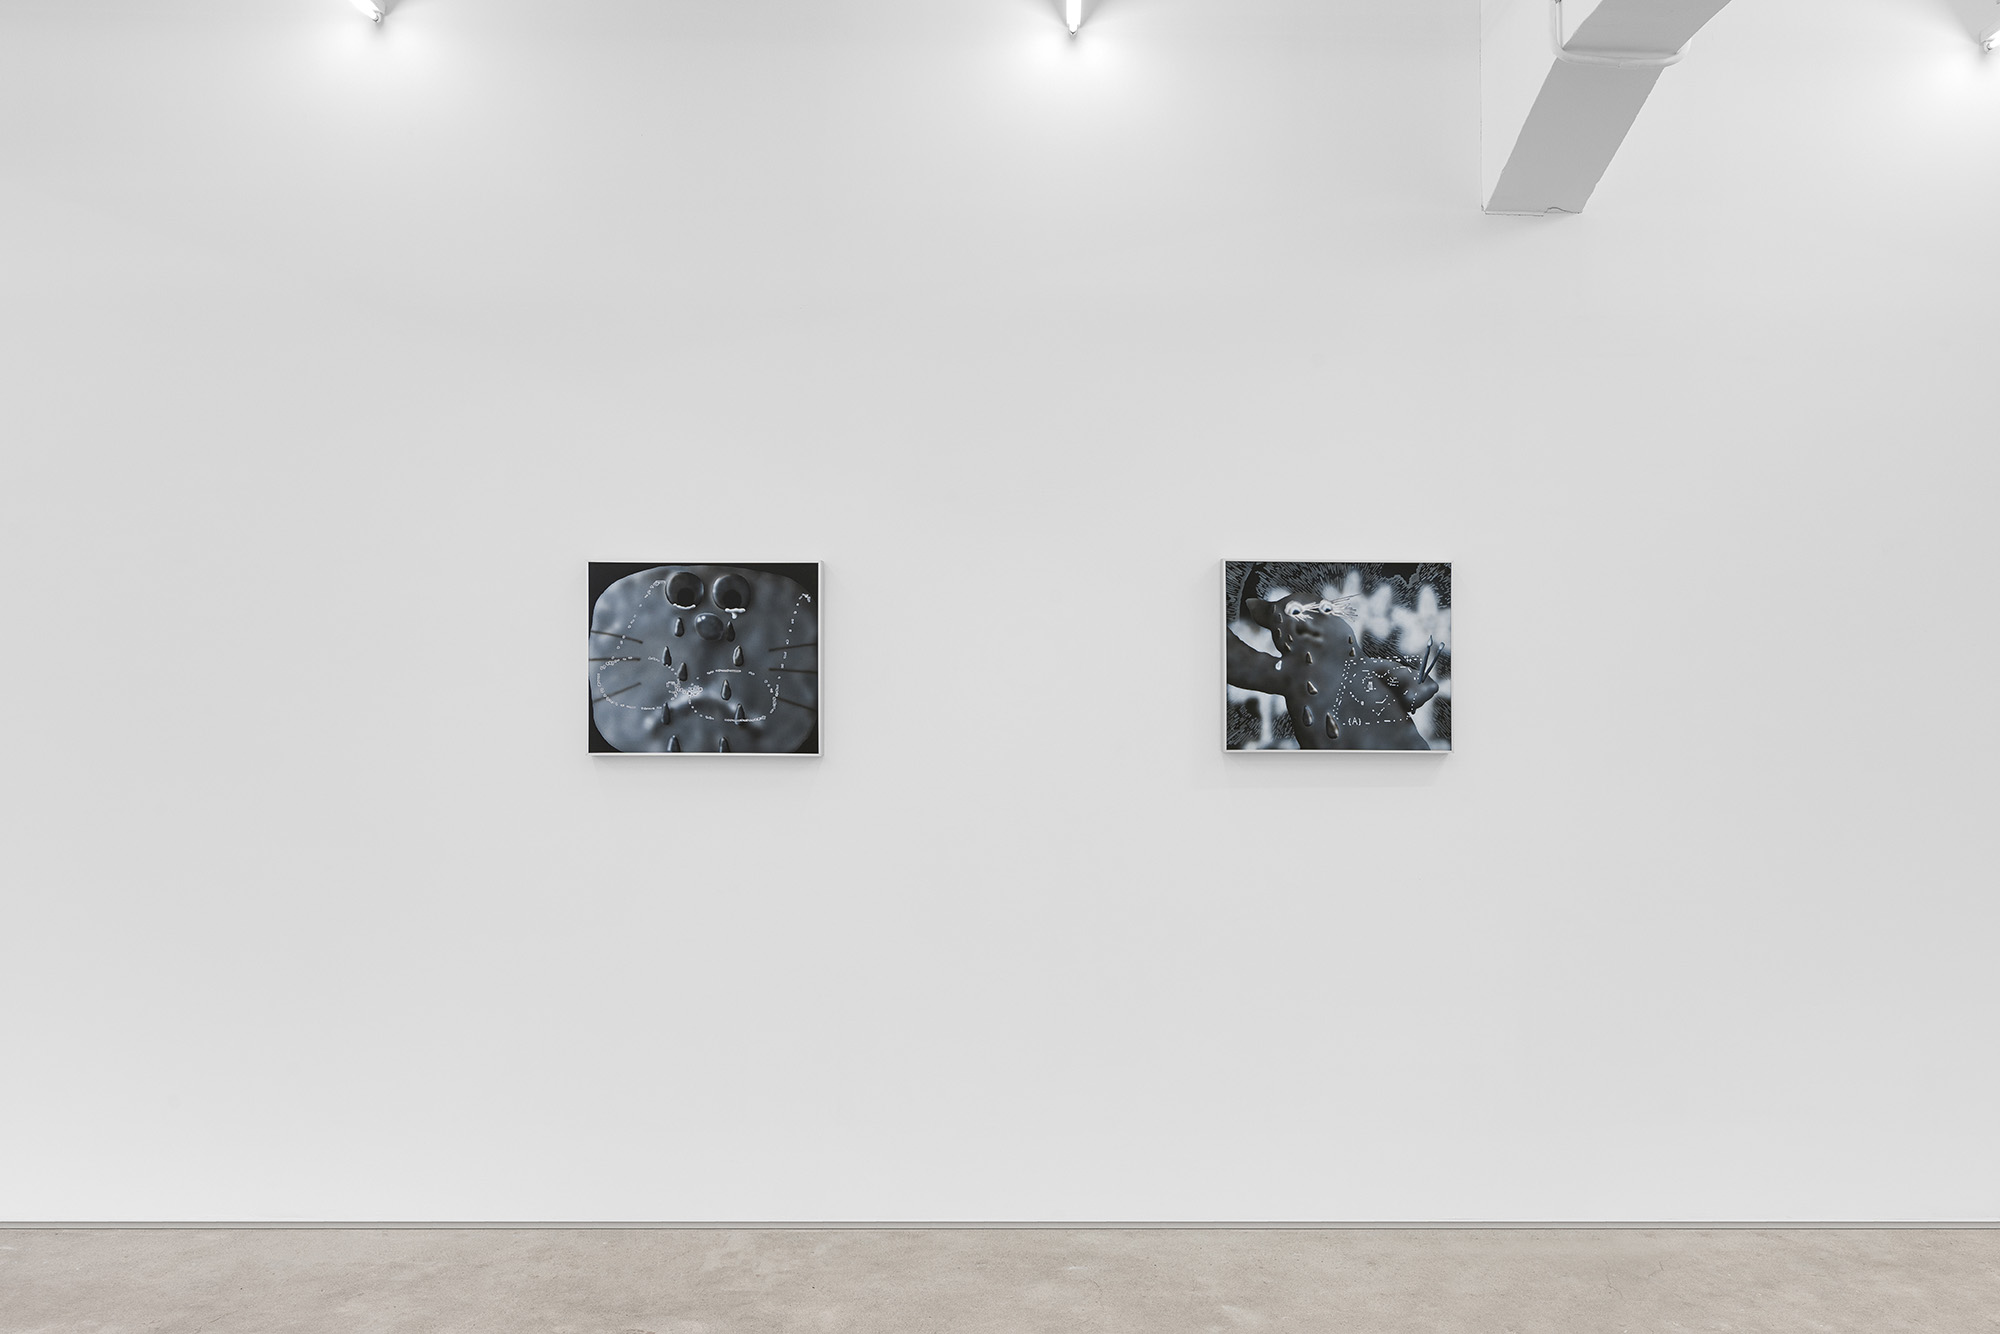 Installation view of group exhibition, Vacation II, at Gallery Vacancy, featuring works by Rao Weiyi.